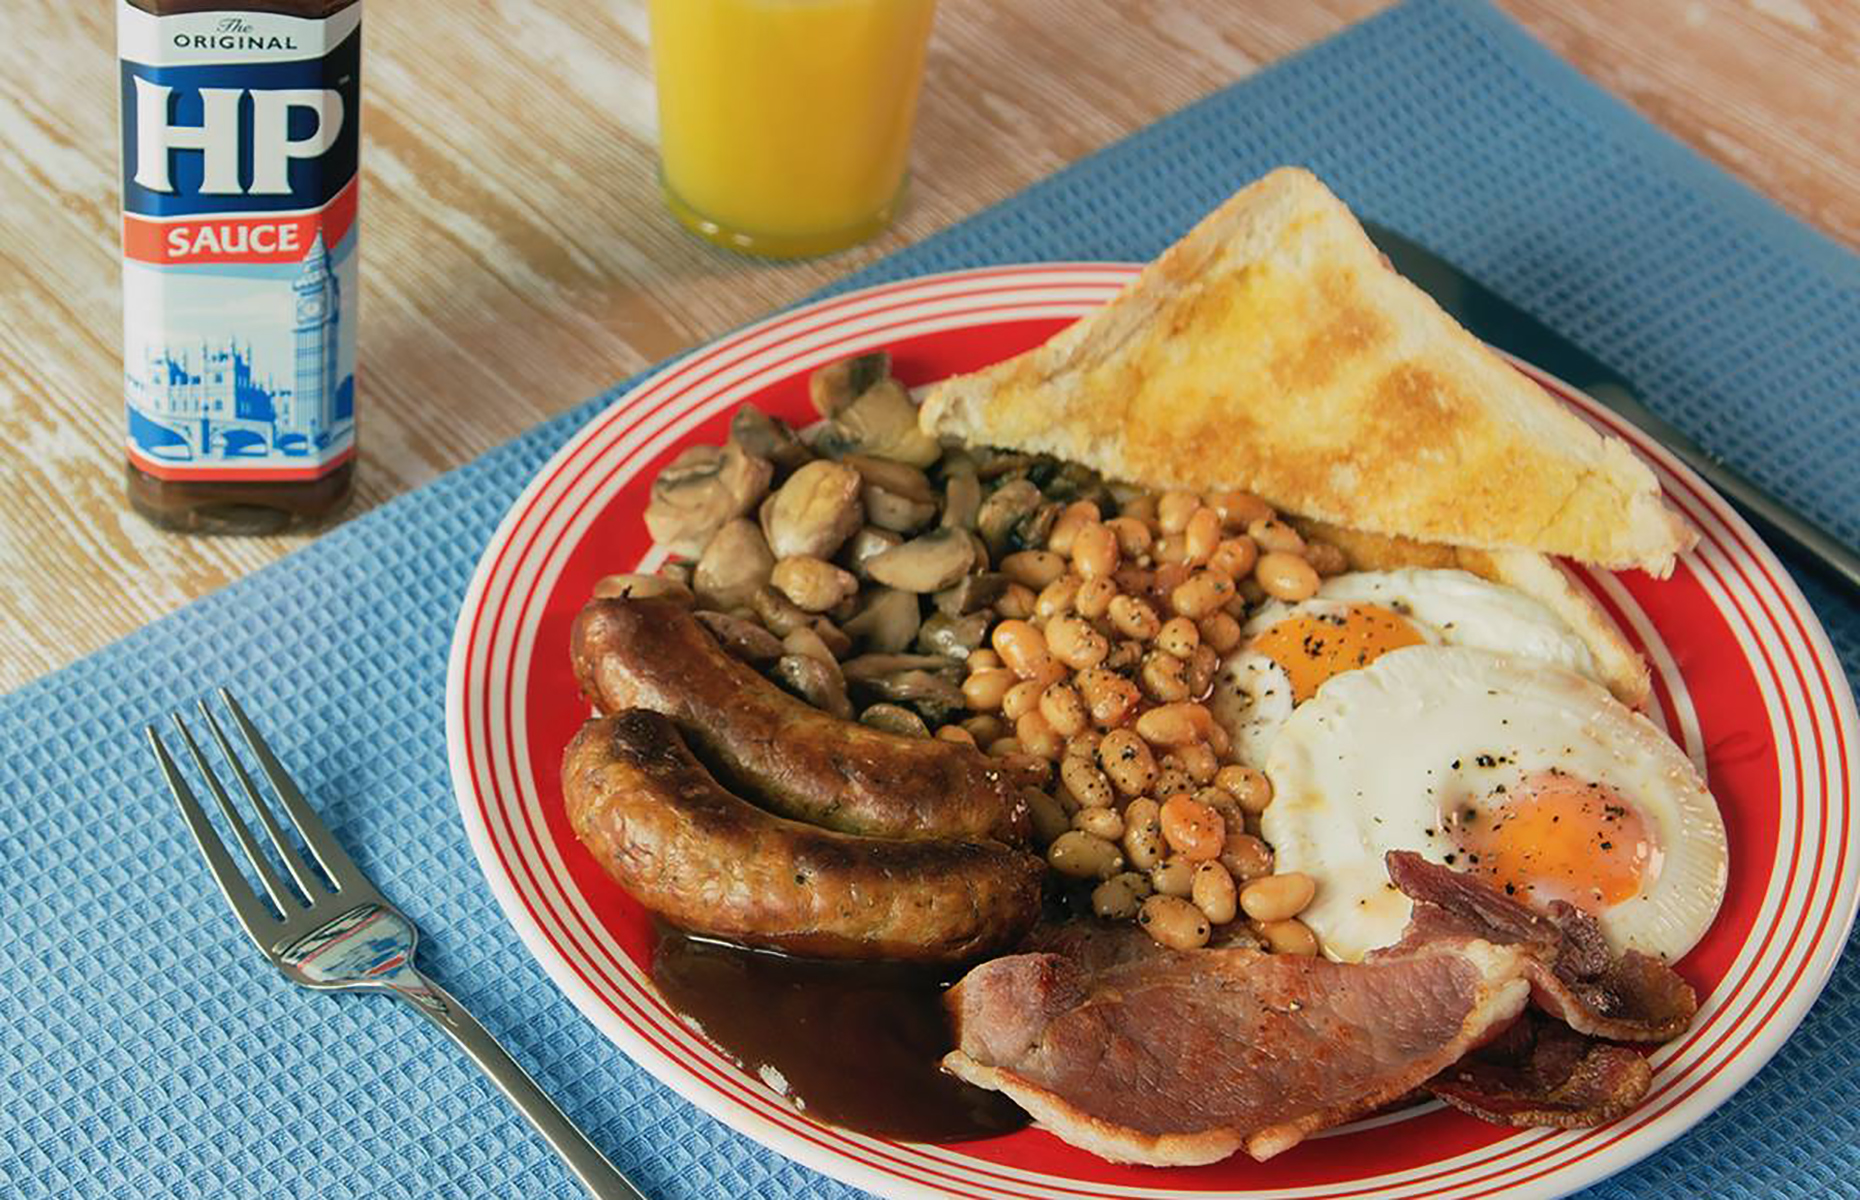 HP brown sauce with a full English breakfast (Image: HPSauceUK/Facebook)